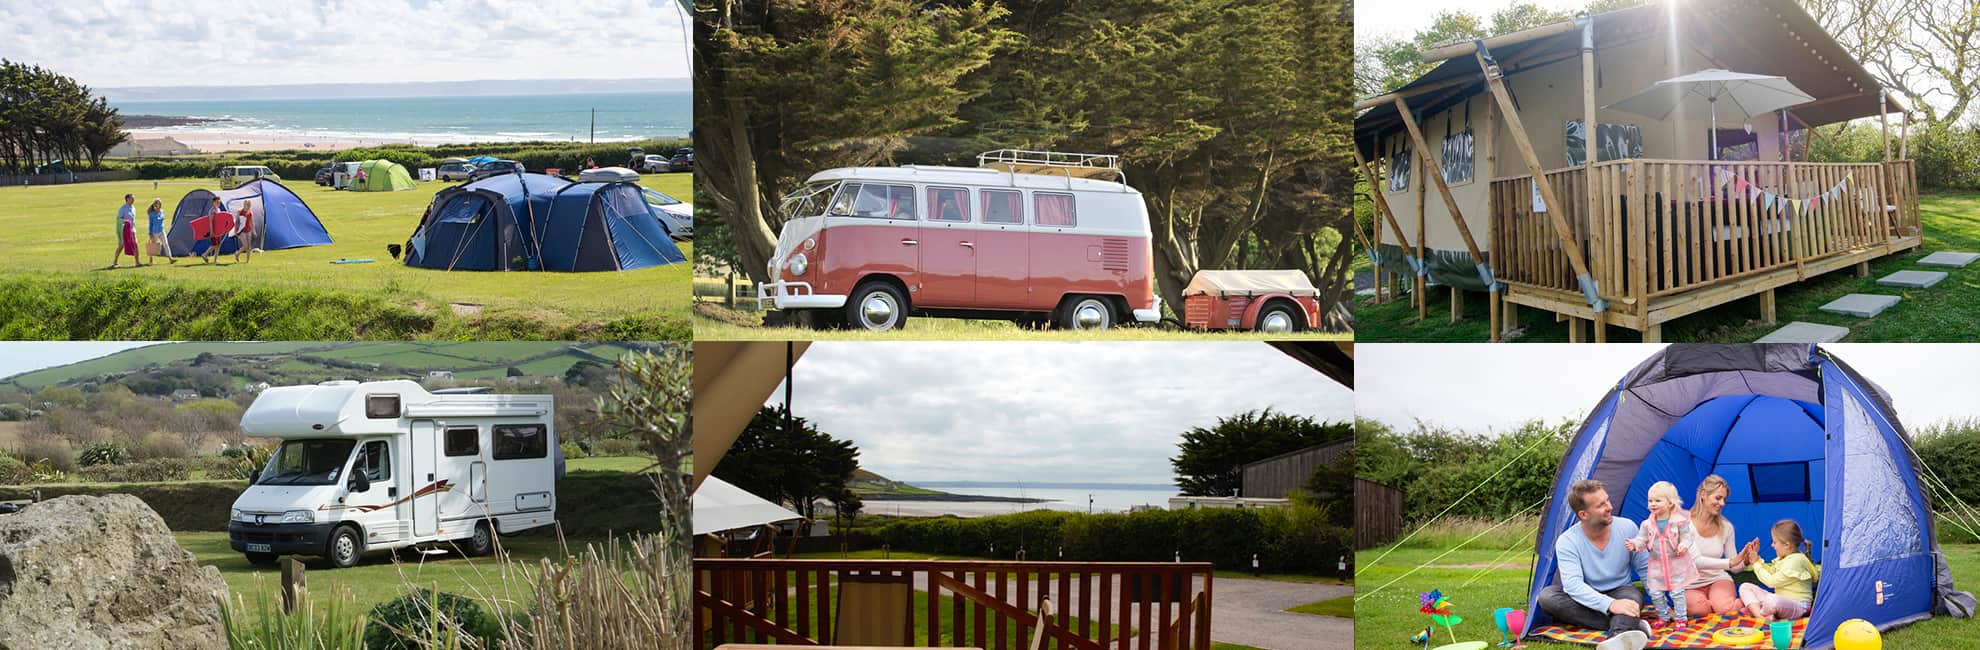 A collage of photos showing the touring, camping and glamping sites in Devon